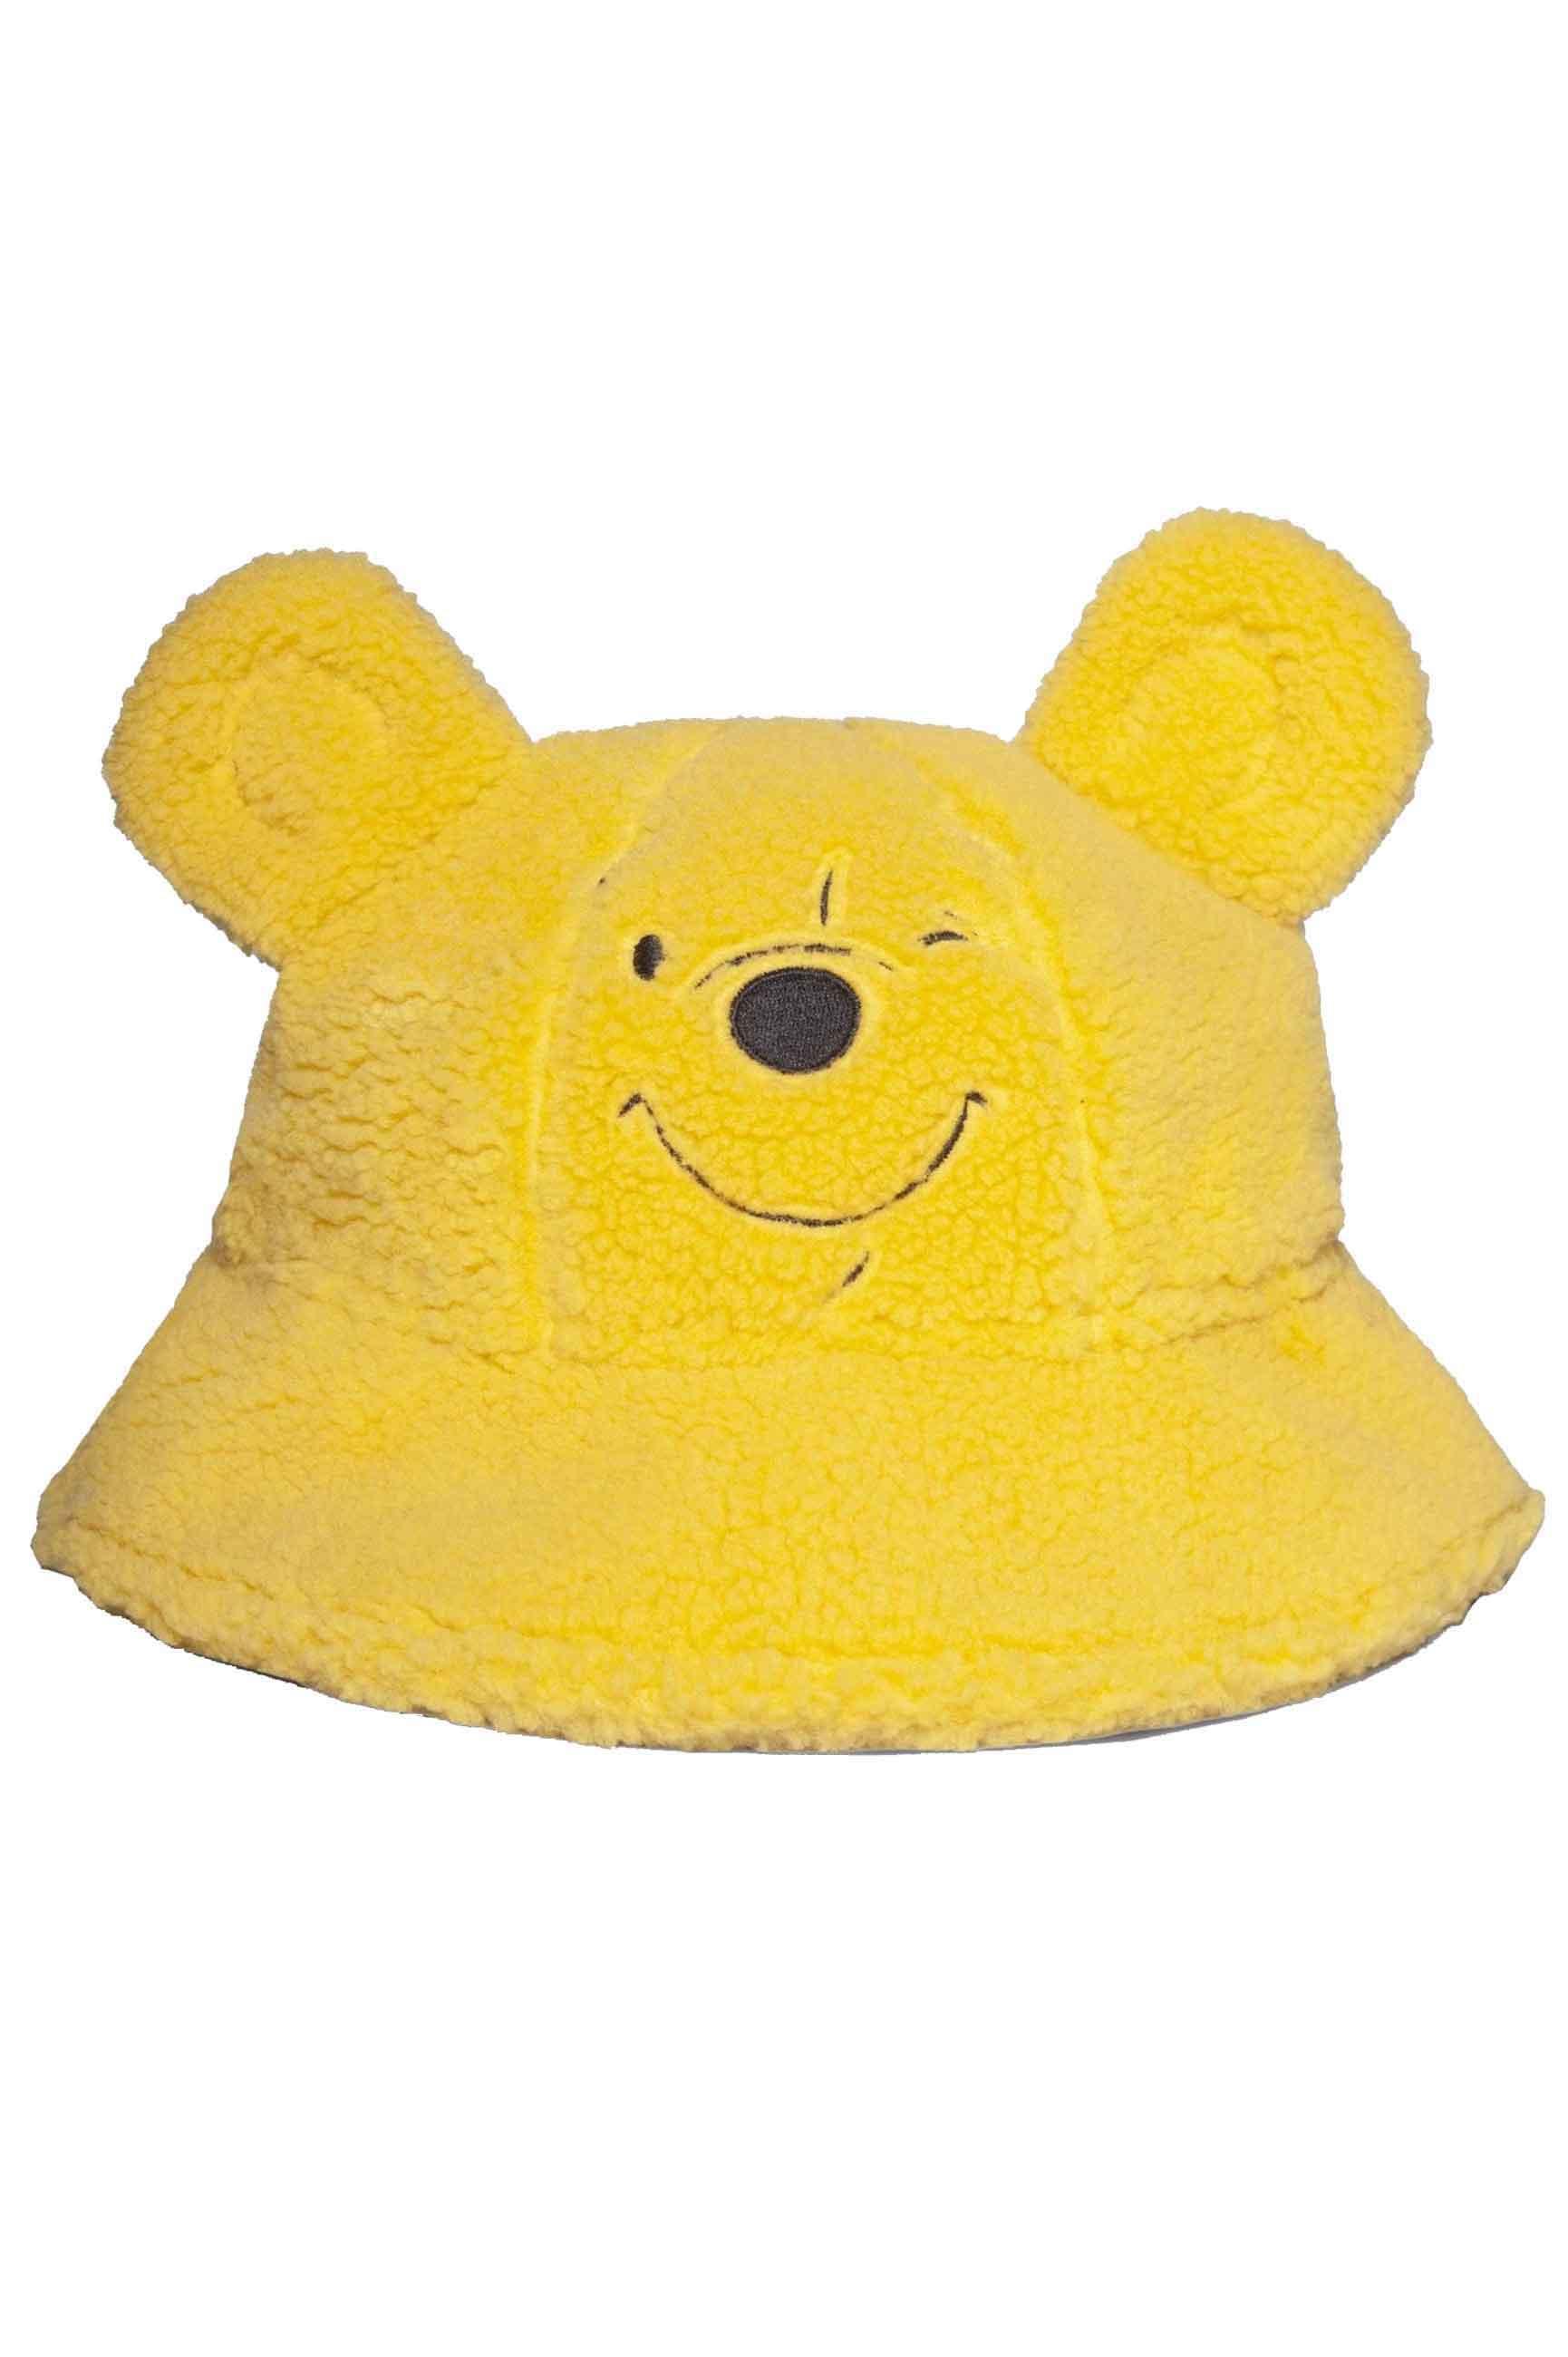 Winnie The Pooh Bucket Hat Teddy new Official Yellow